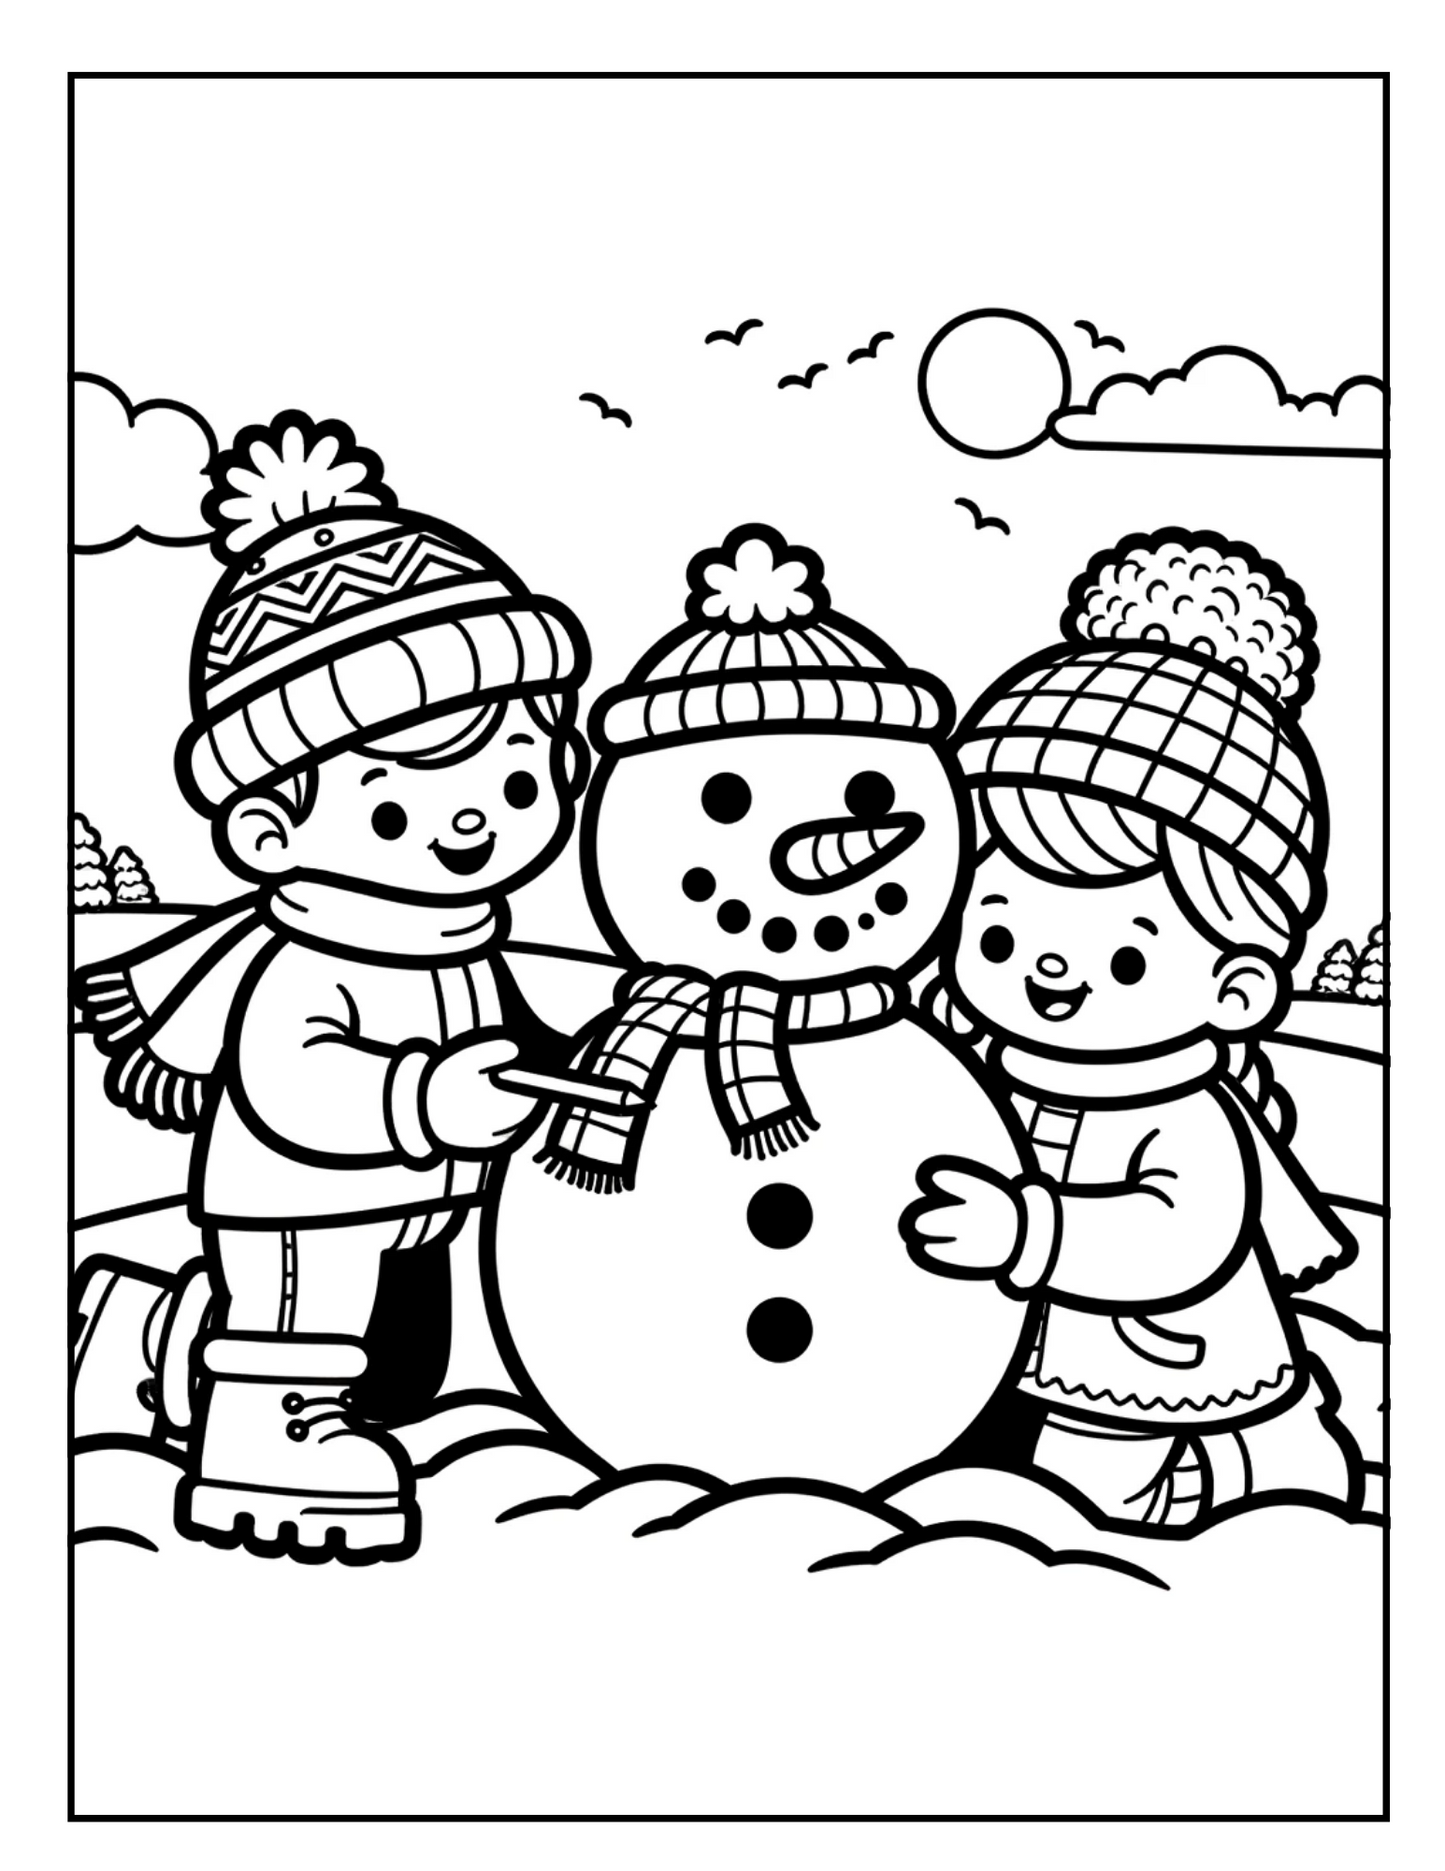 FREE Kids Building Snowman Coloring Page